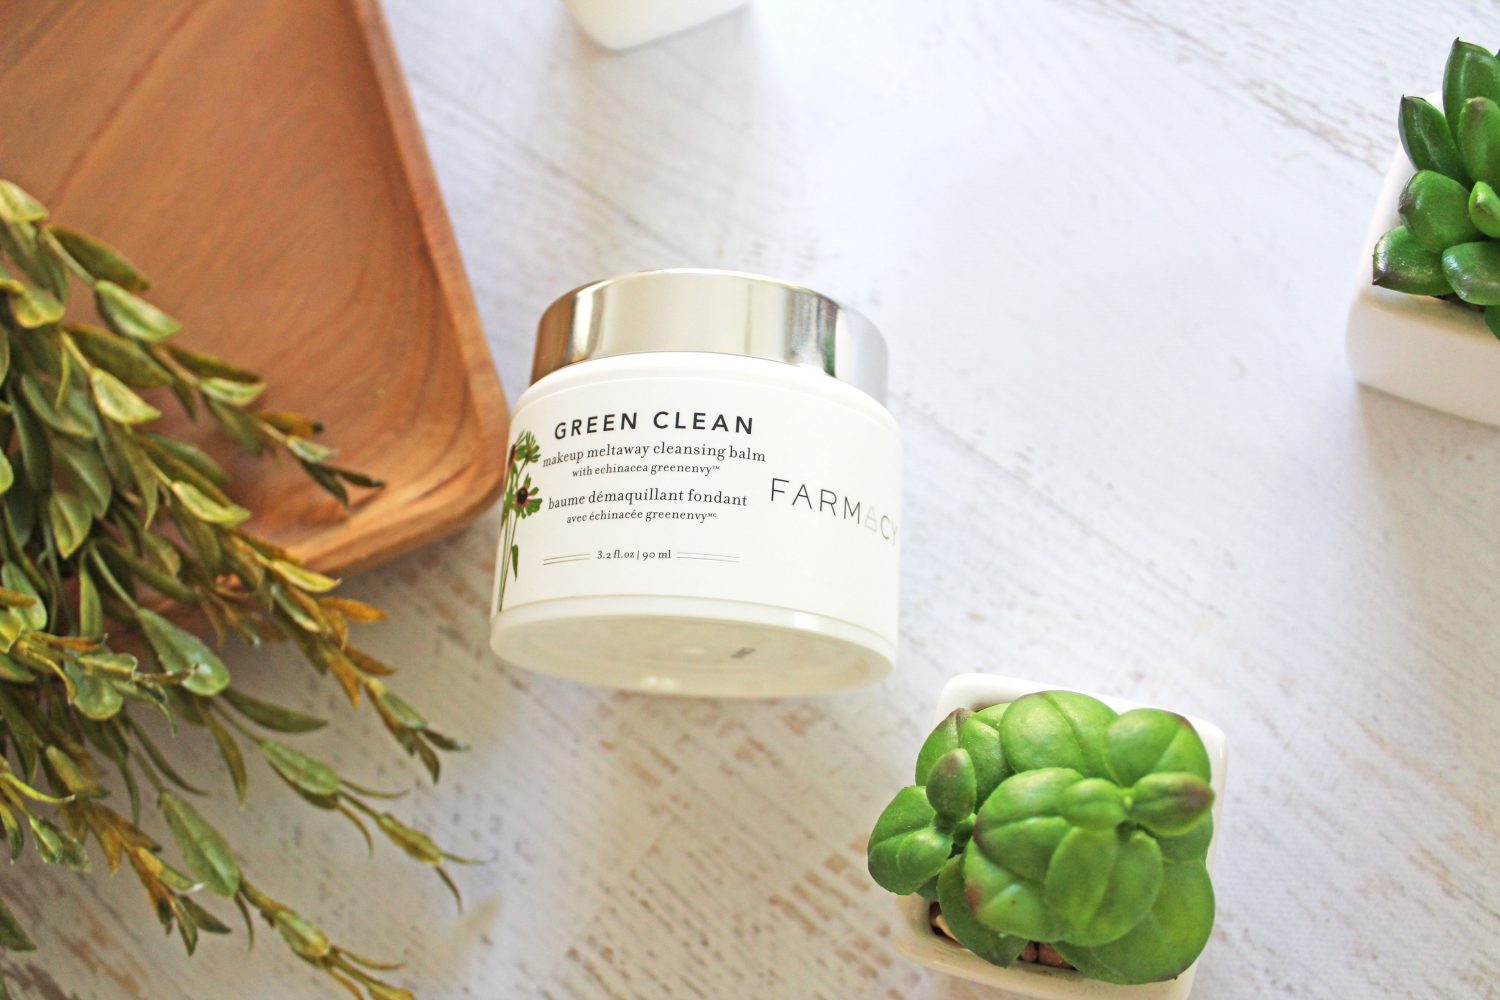 farmacy green clean makeup meltaway cleansing balm review by iliketotalkblog